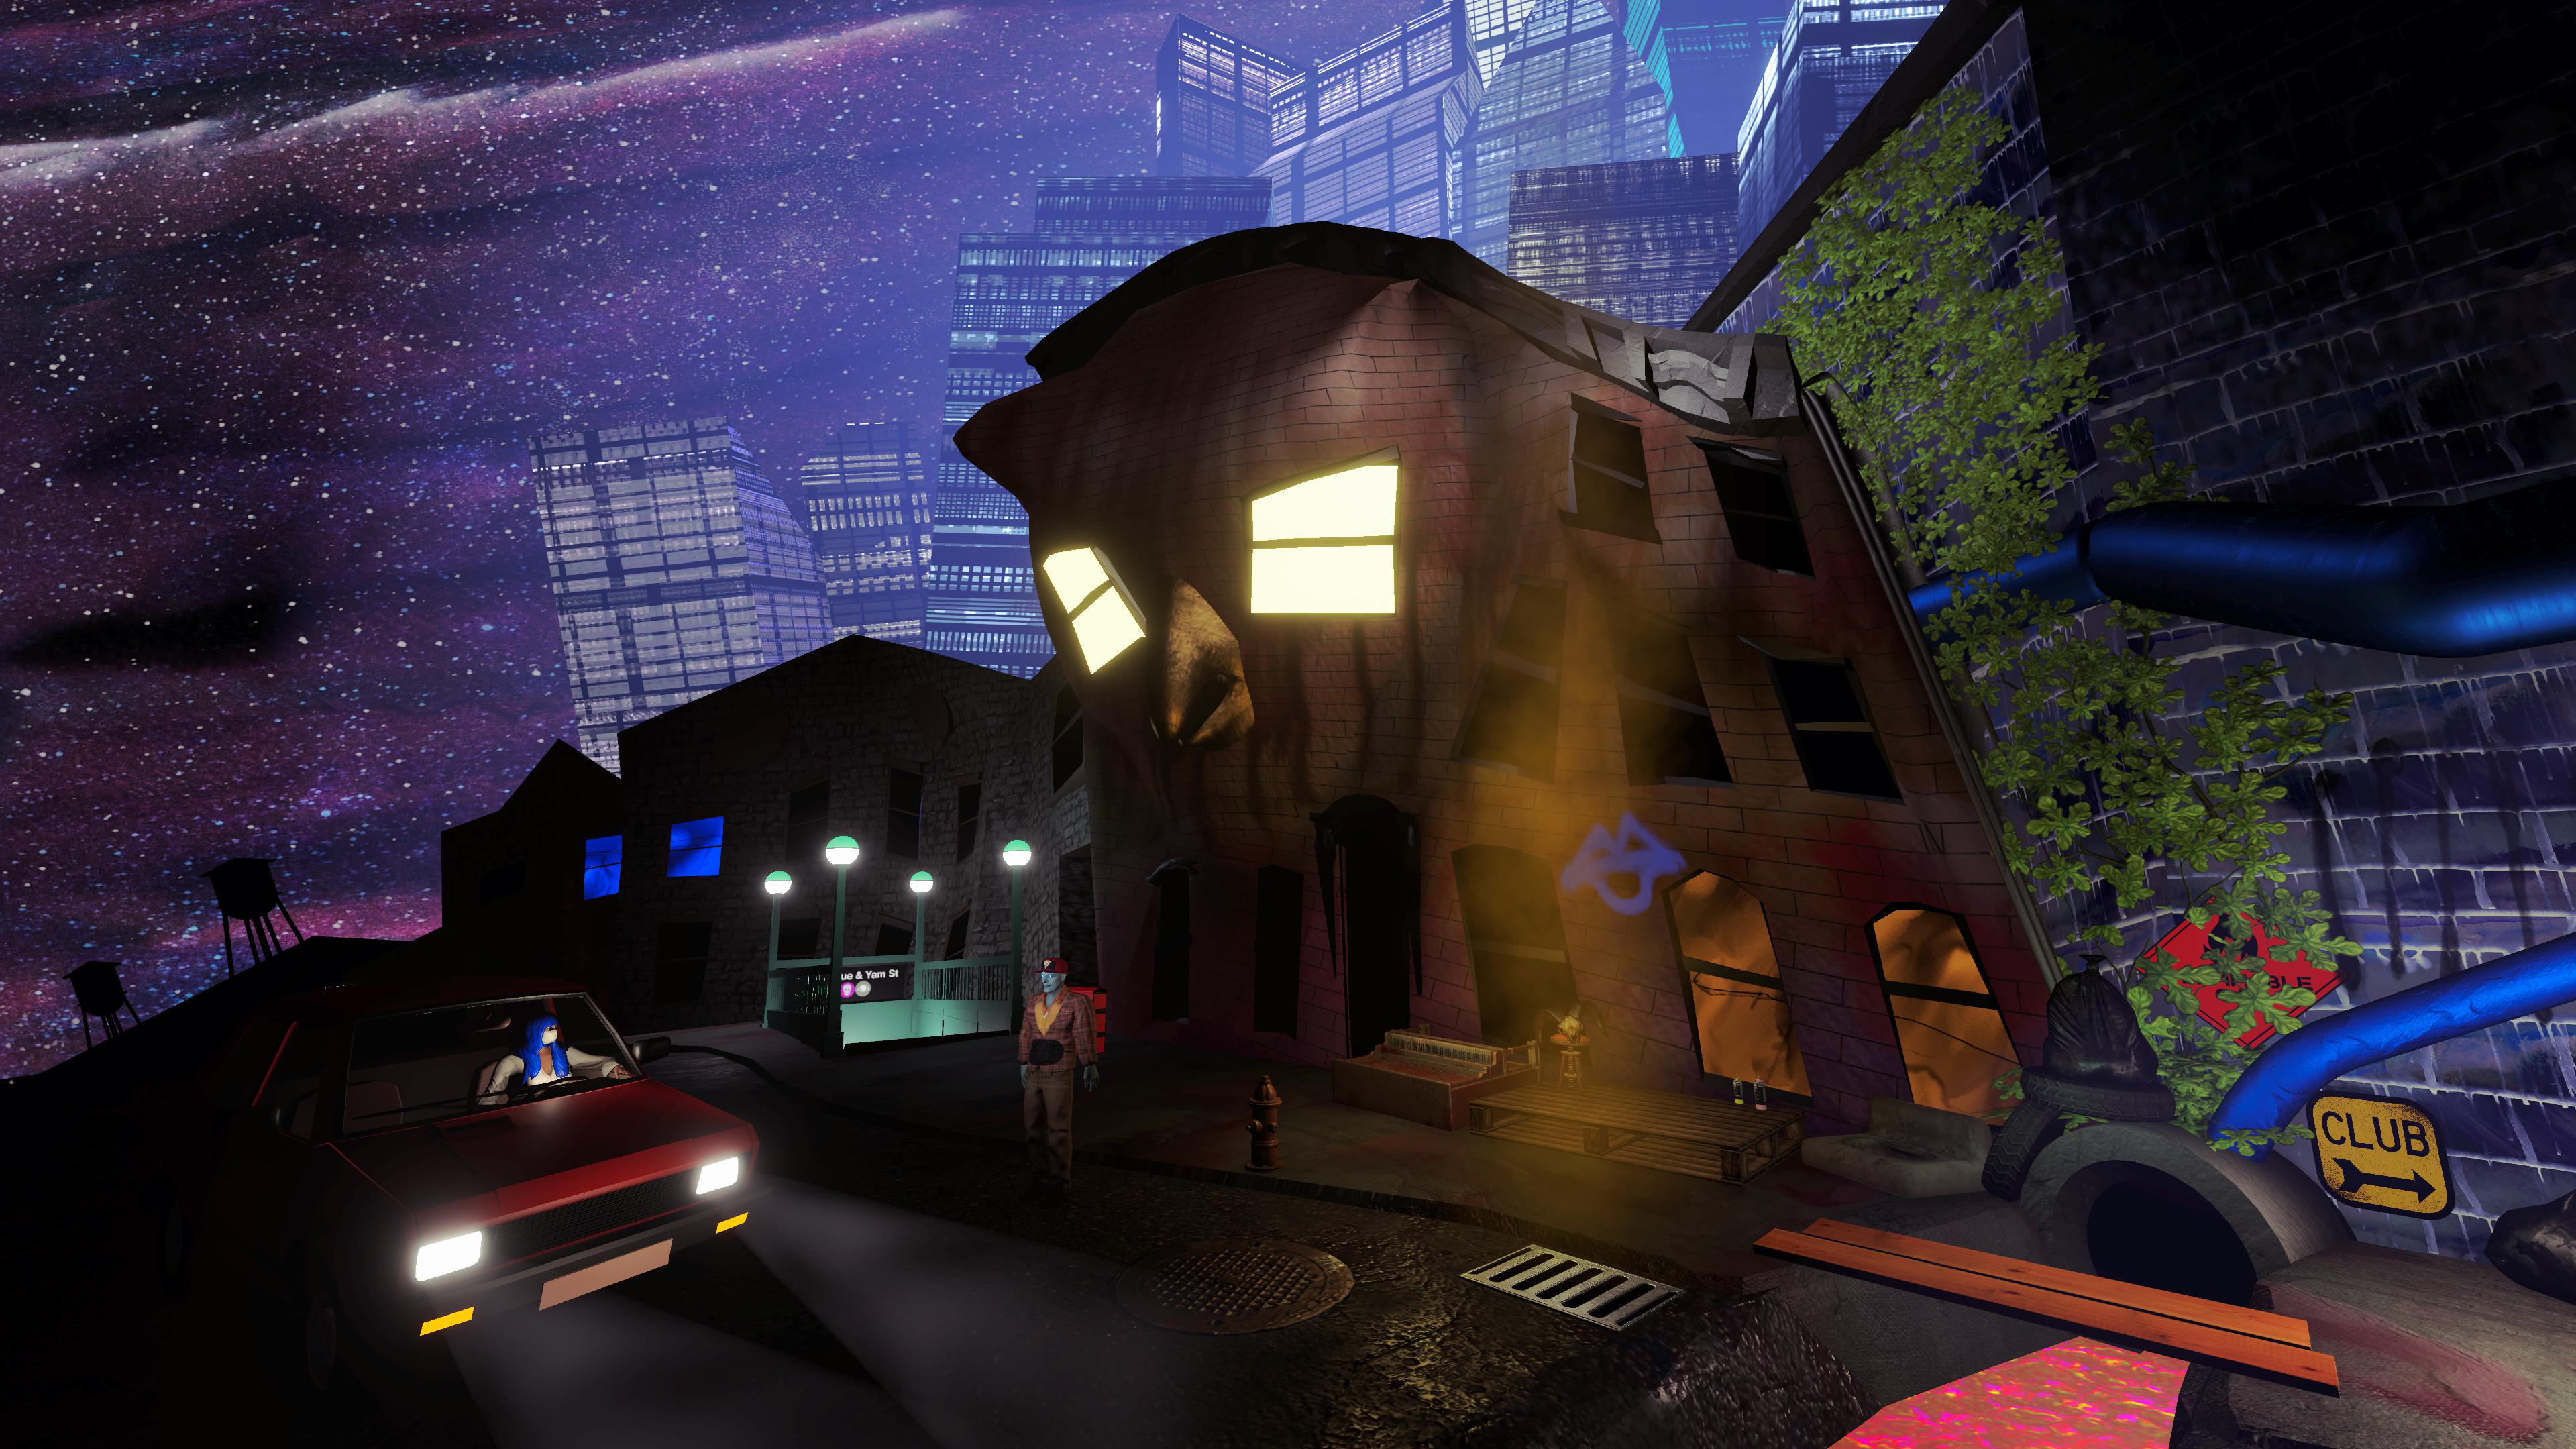 Still from gameplay in Betrayal at Club Low: A view outside the eponymous Club Low